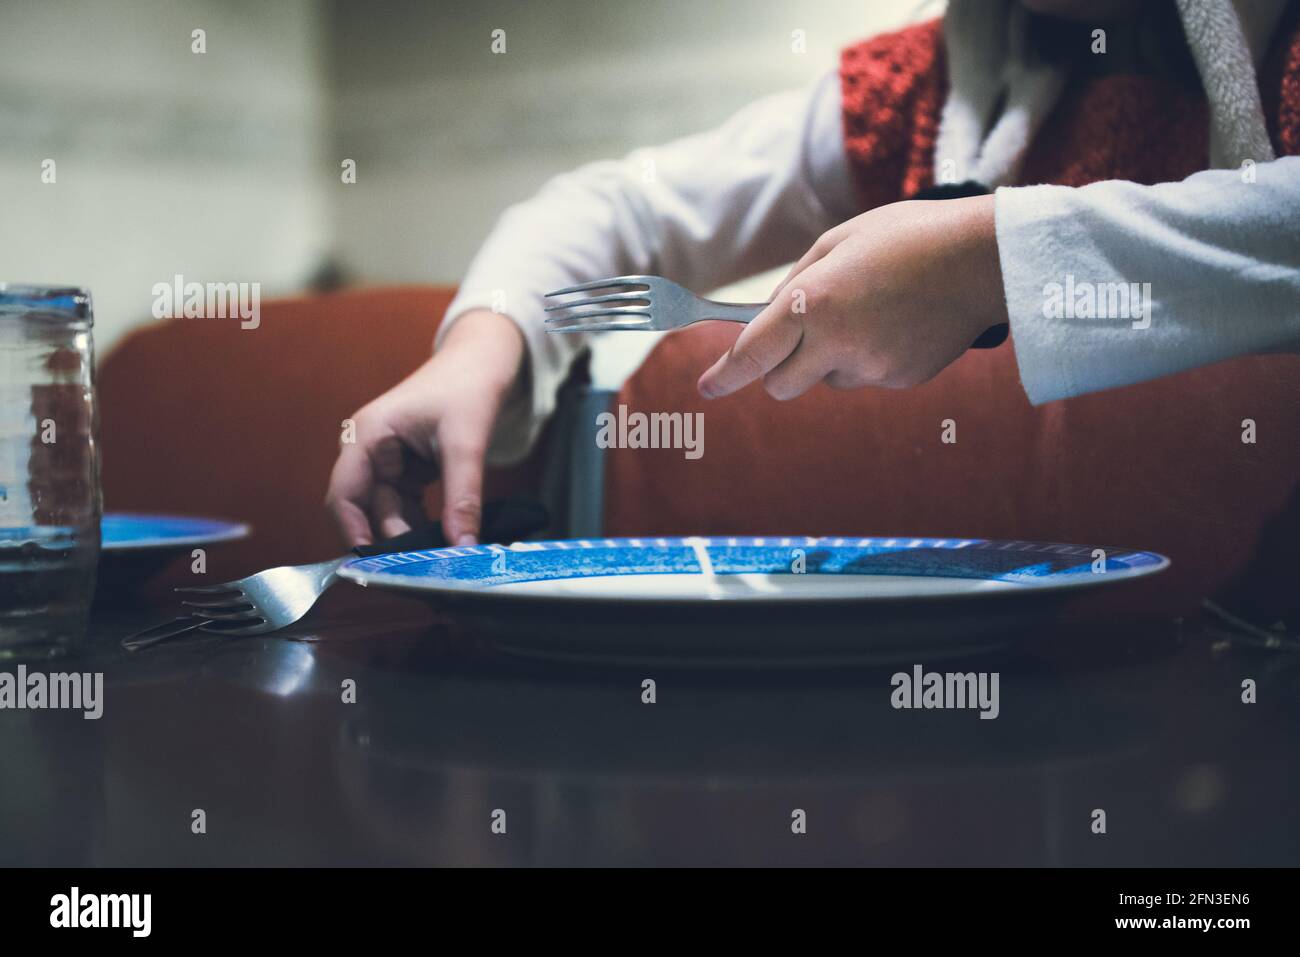 Preparing food with a recipe, eggs and flour, in these quarantine times at home. Stock Photo